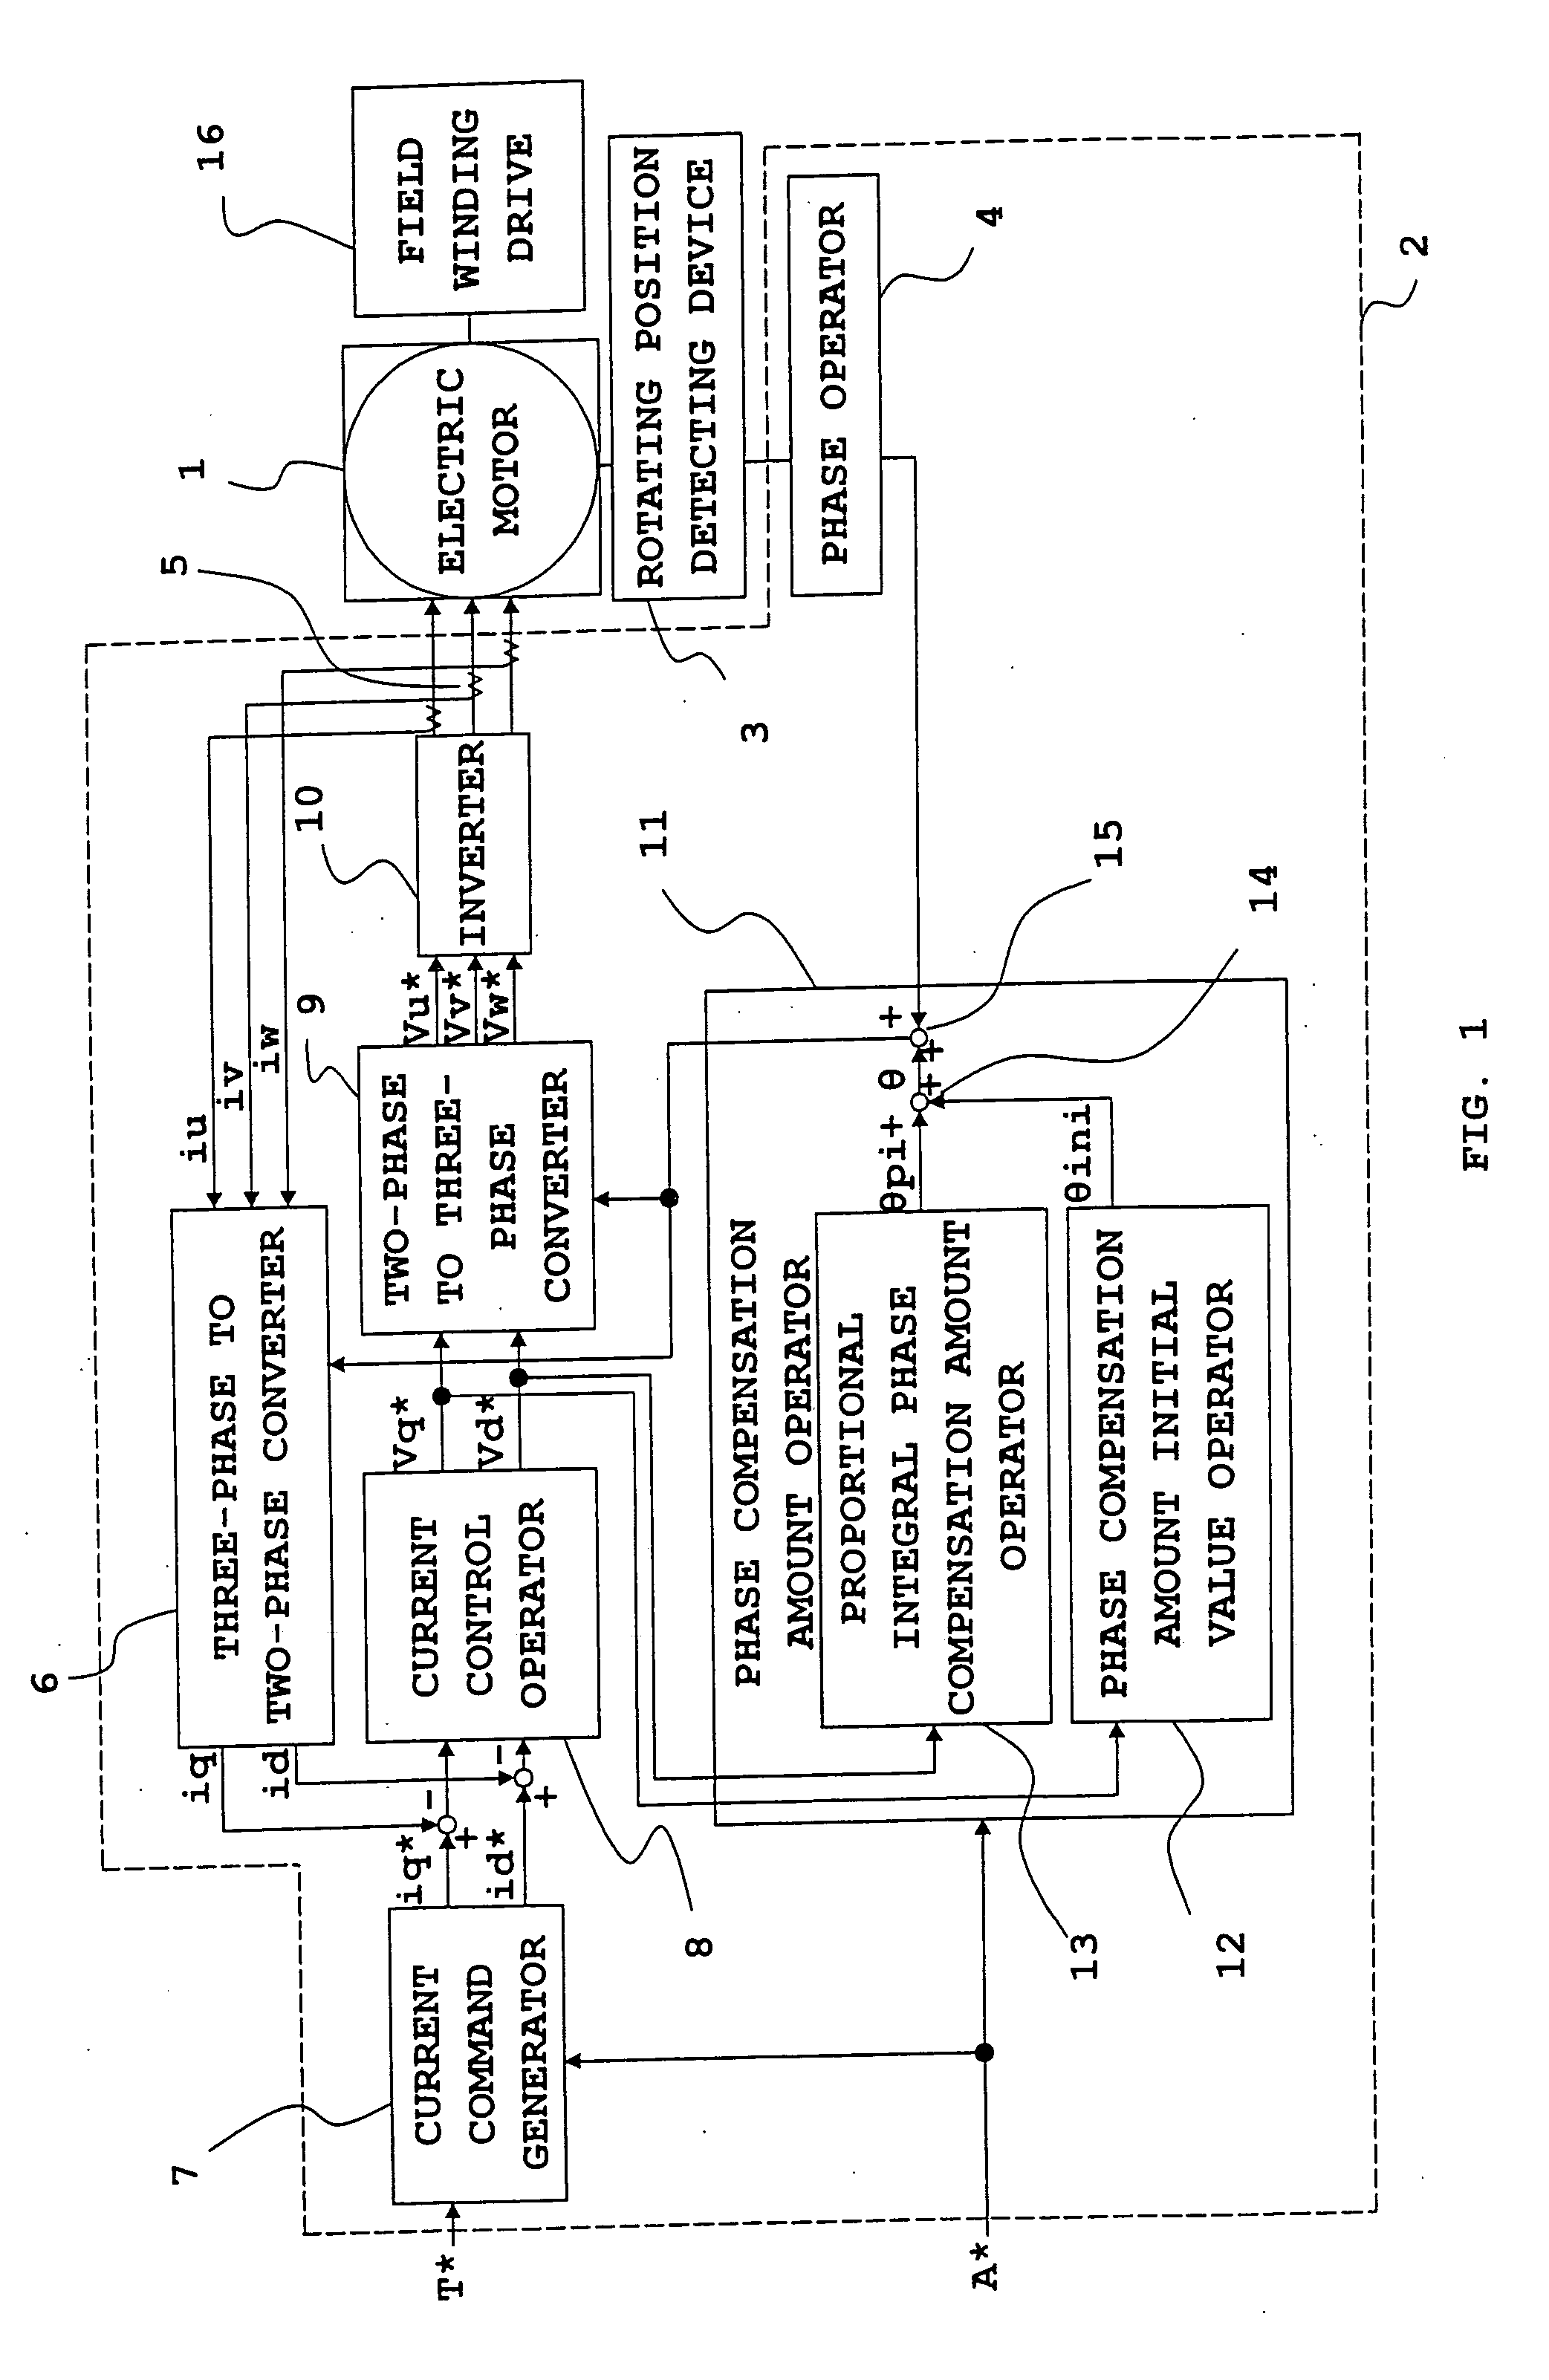 Origin offset calculation method of rotational position detecting device of electric motor and motor control device using the calculation method